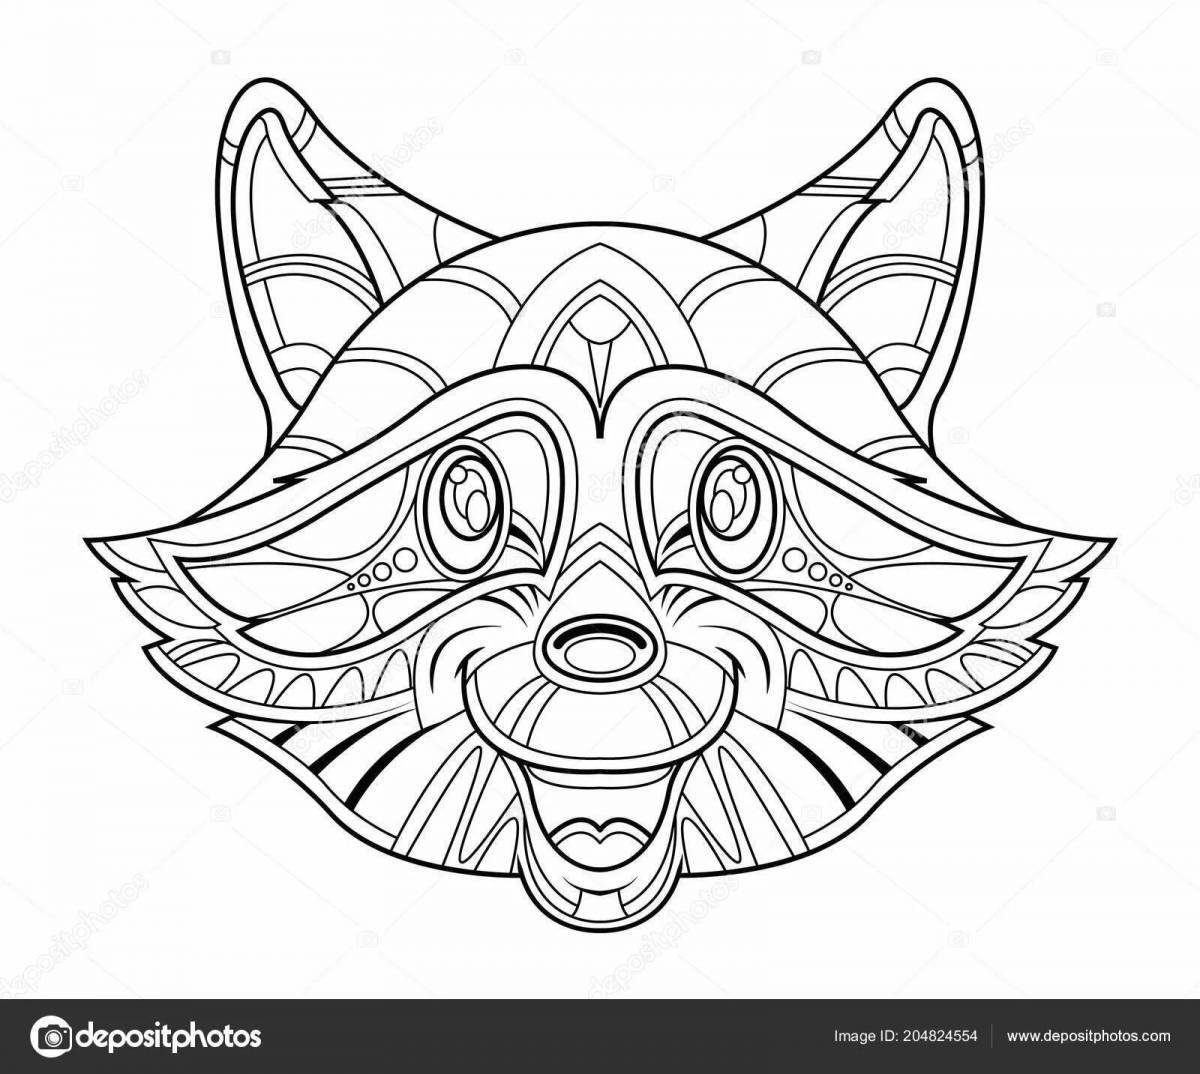 Coloring book alluring raccoon antistress